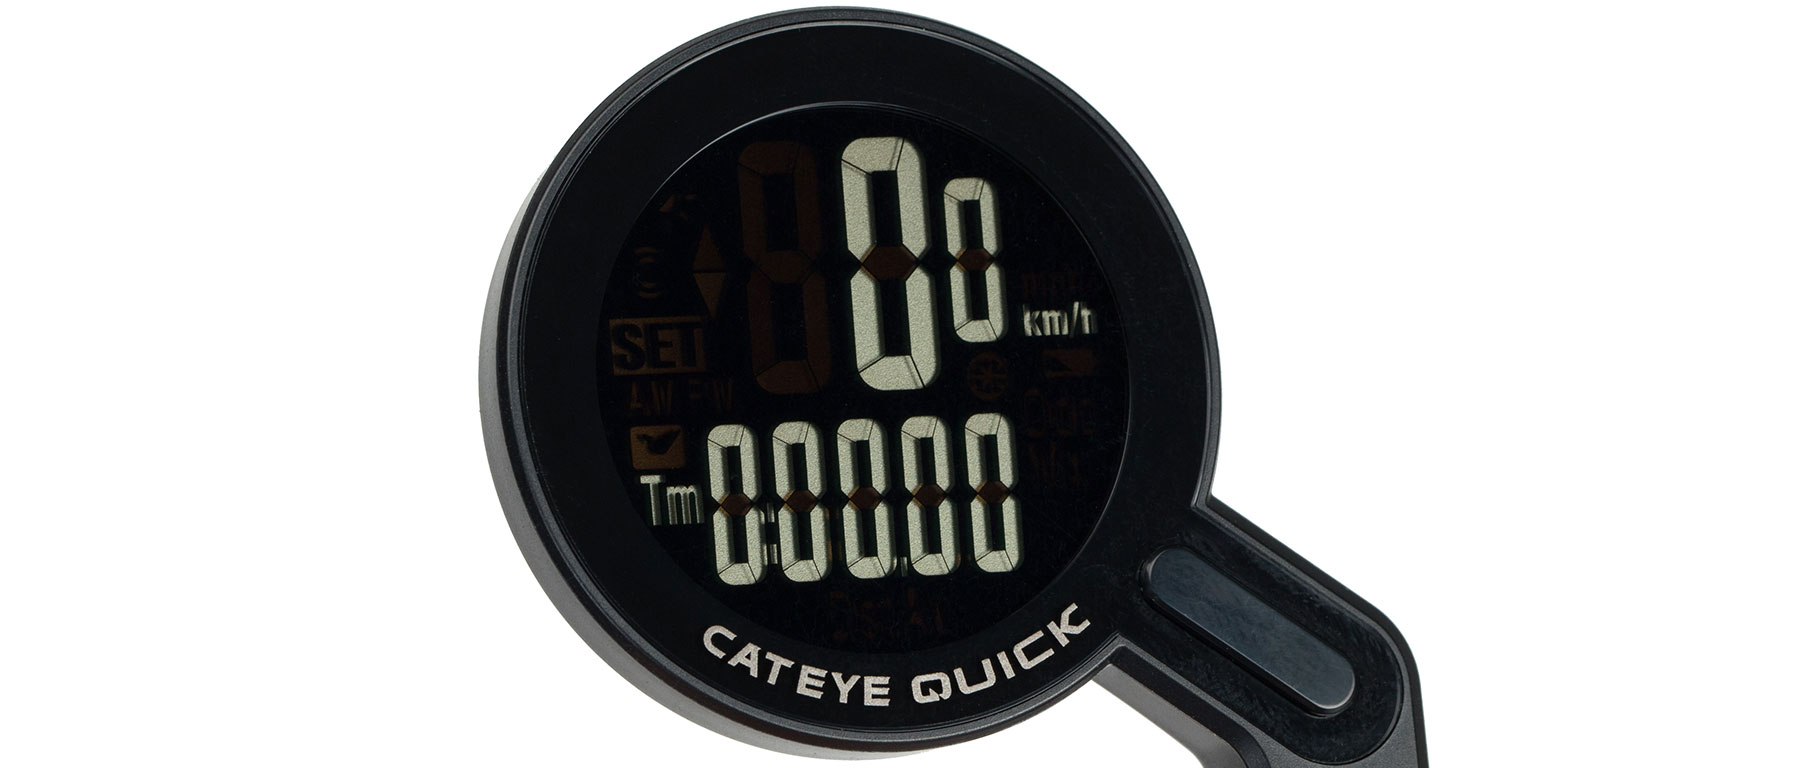 CatEye Quick Cycle Computer